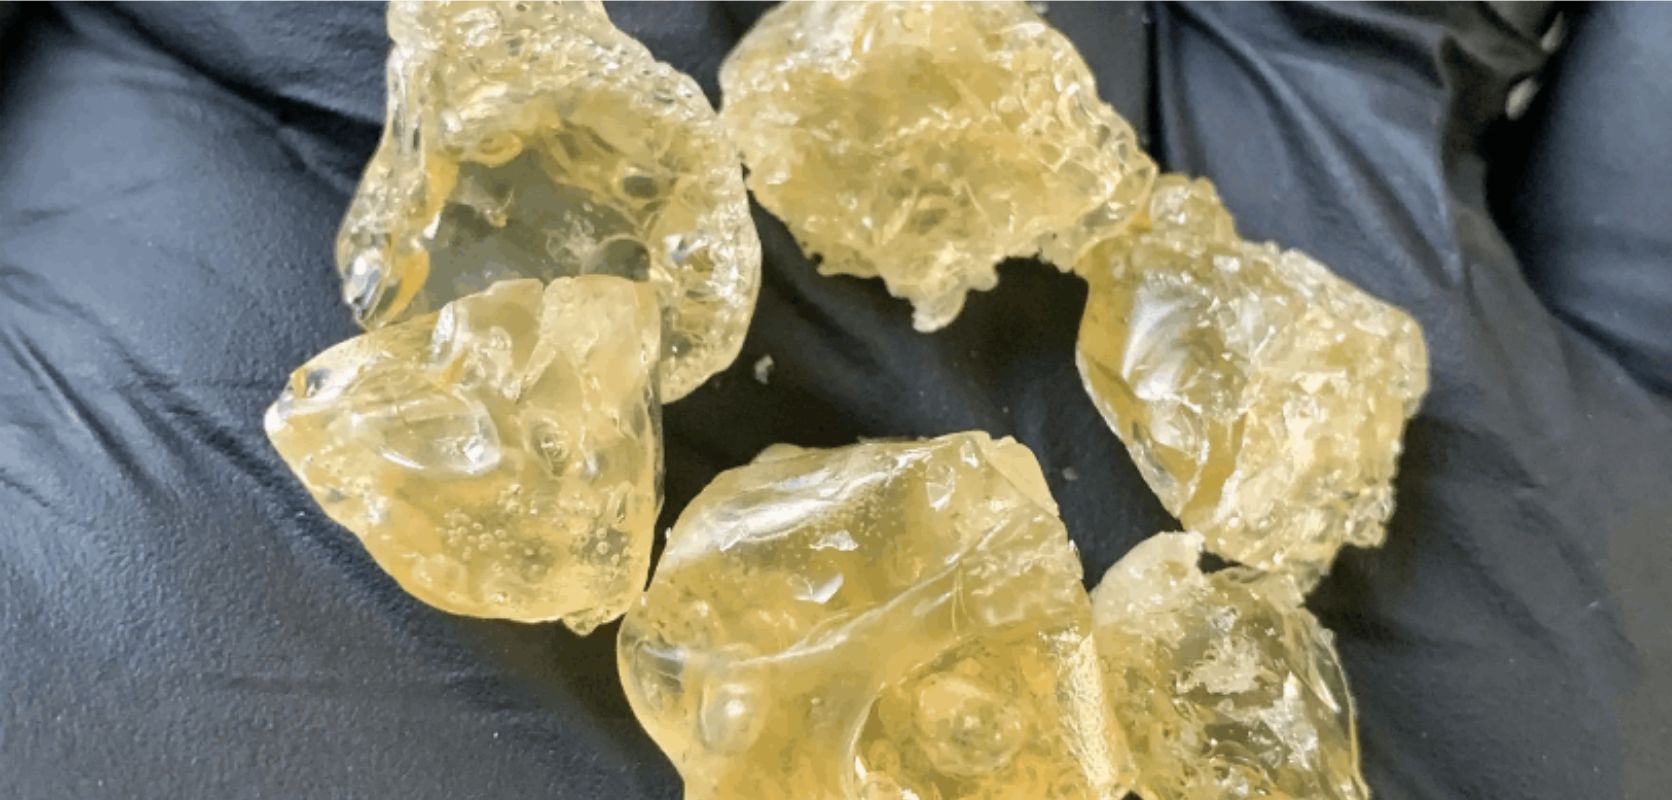 This Premium 5 THCA diamonds review is here to lead you to greener pastures in the form of the purest THC you can get your hands on today. 